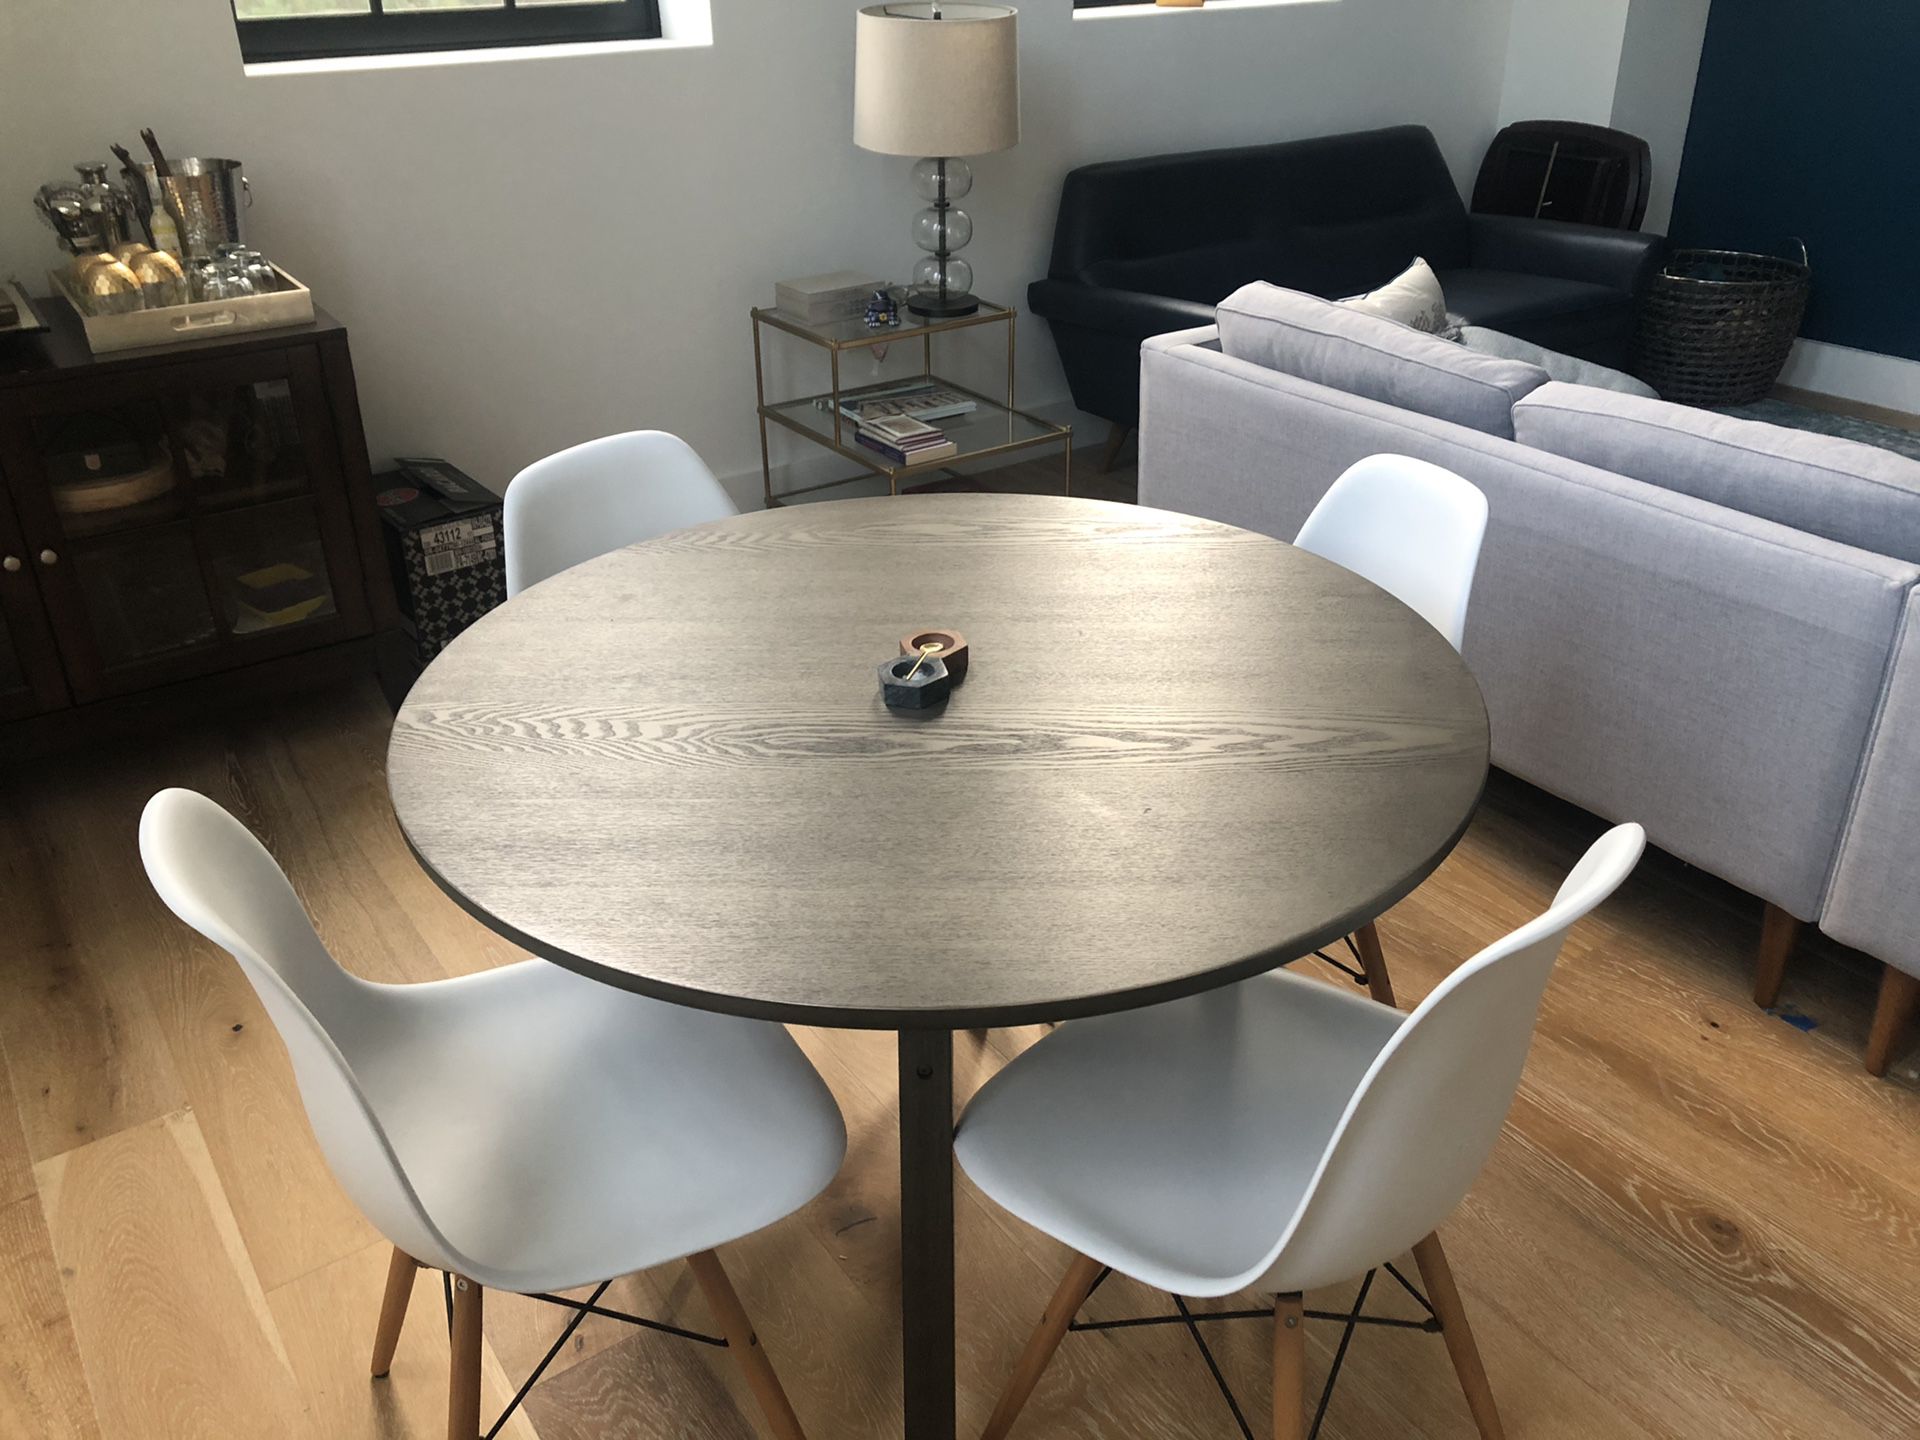 Crate & Barrel Scholar dining table & chairs